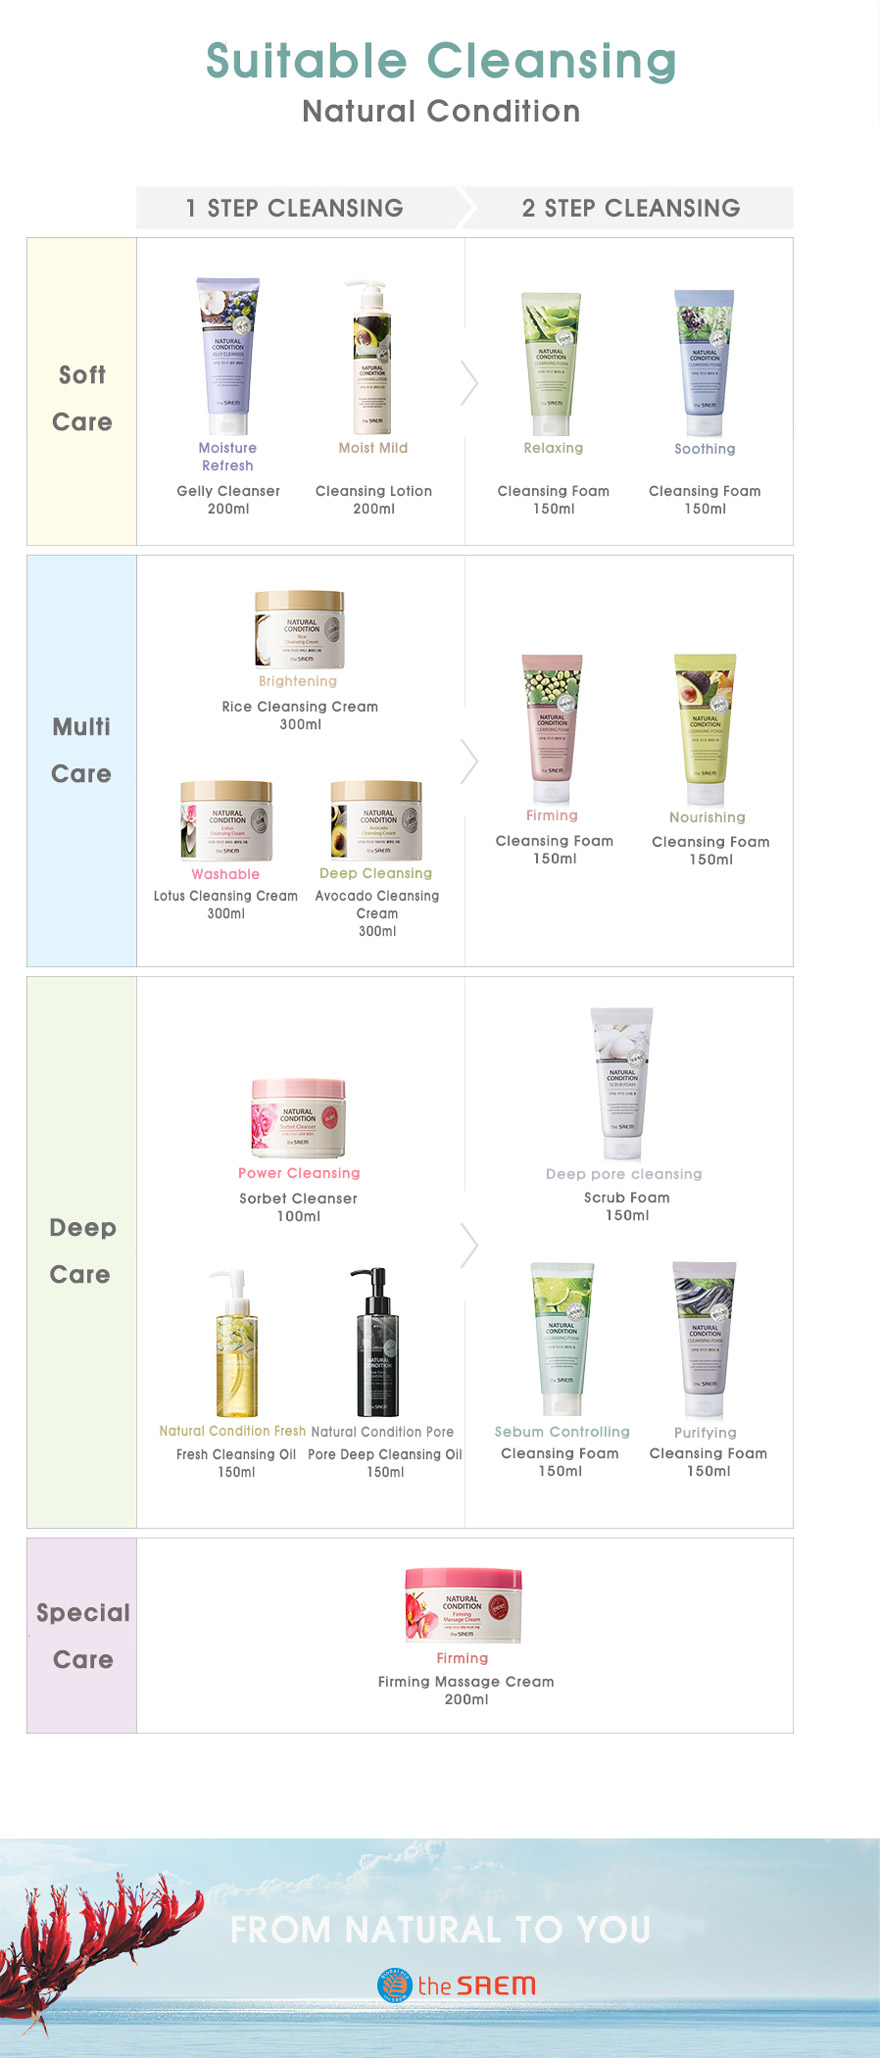 [The saem] Natural Condition Cleansing Foam #Furifying 150ml